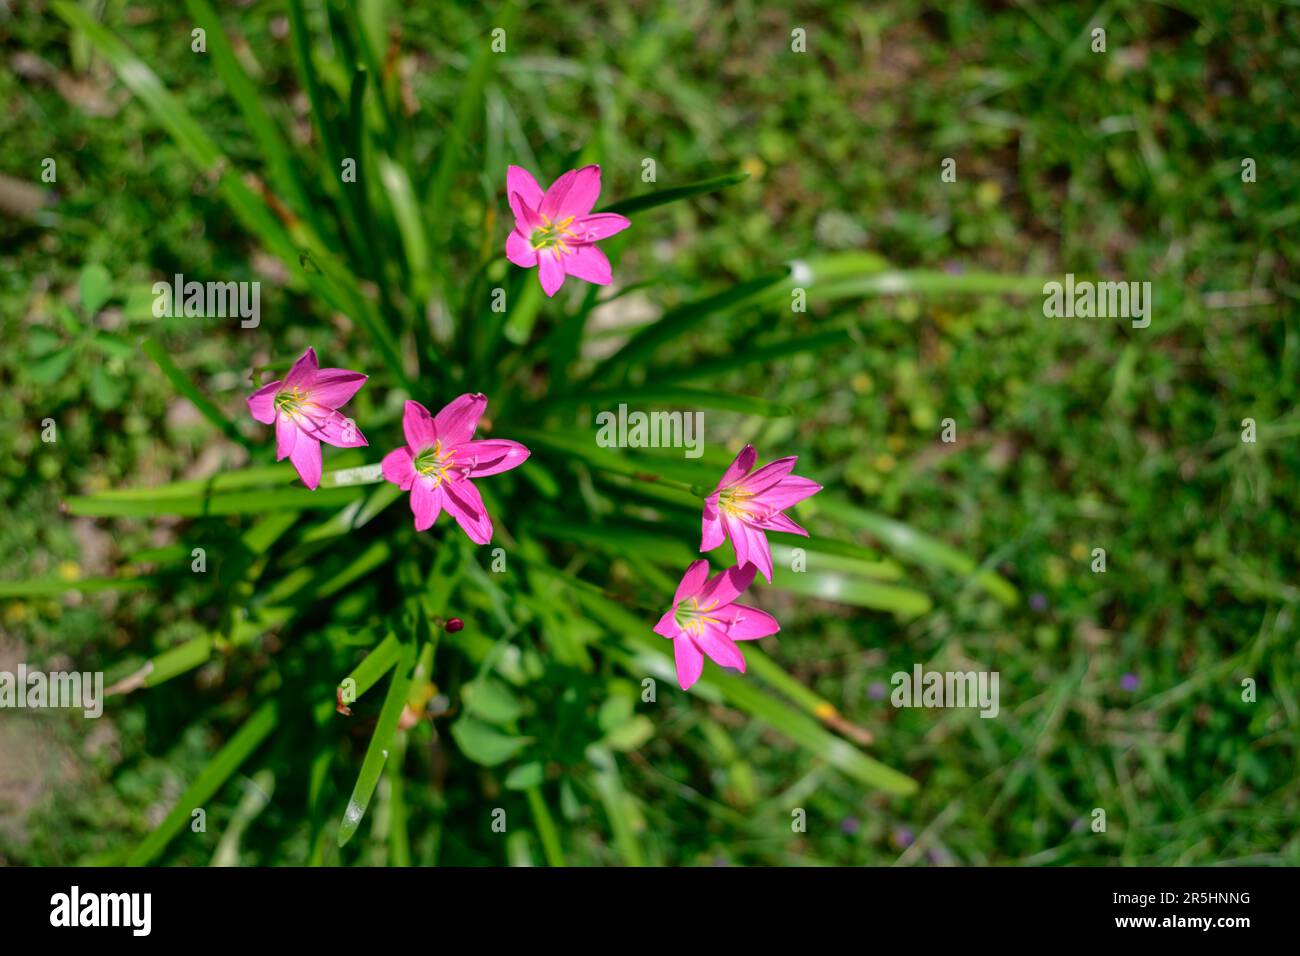 Beautiful Fairy lily flower plant overhead view close-up shot. Stock Photo